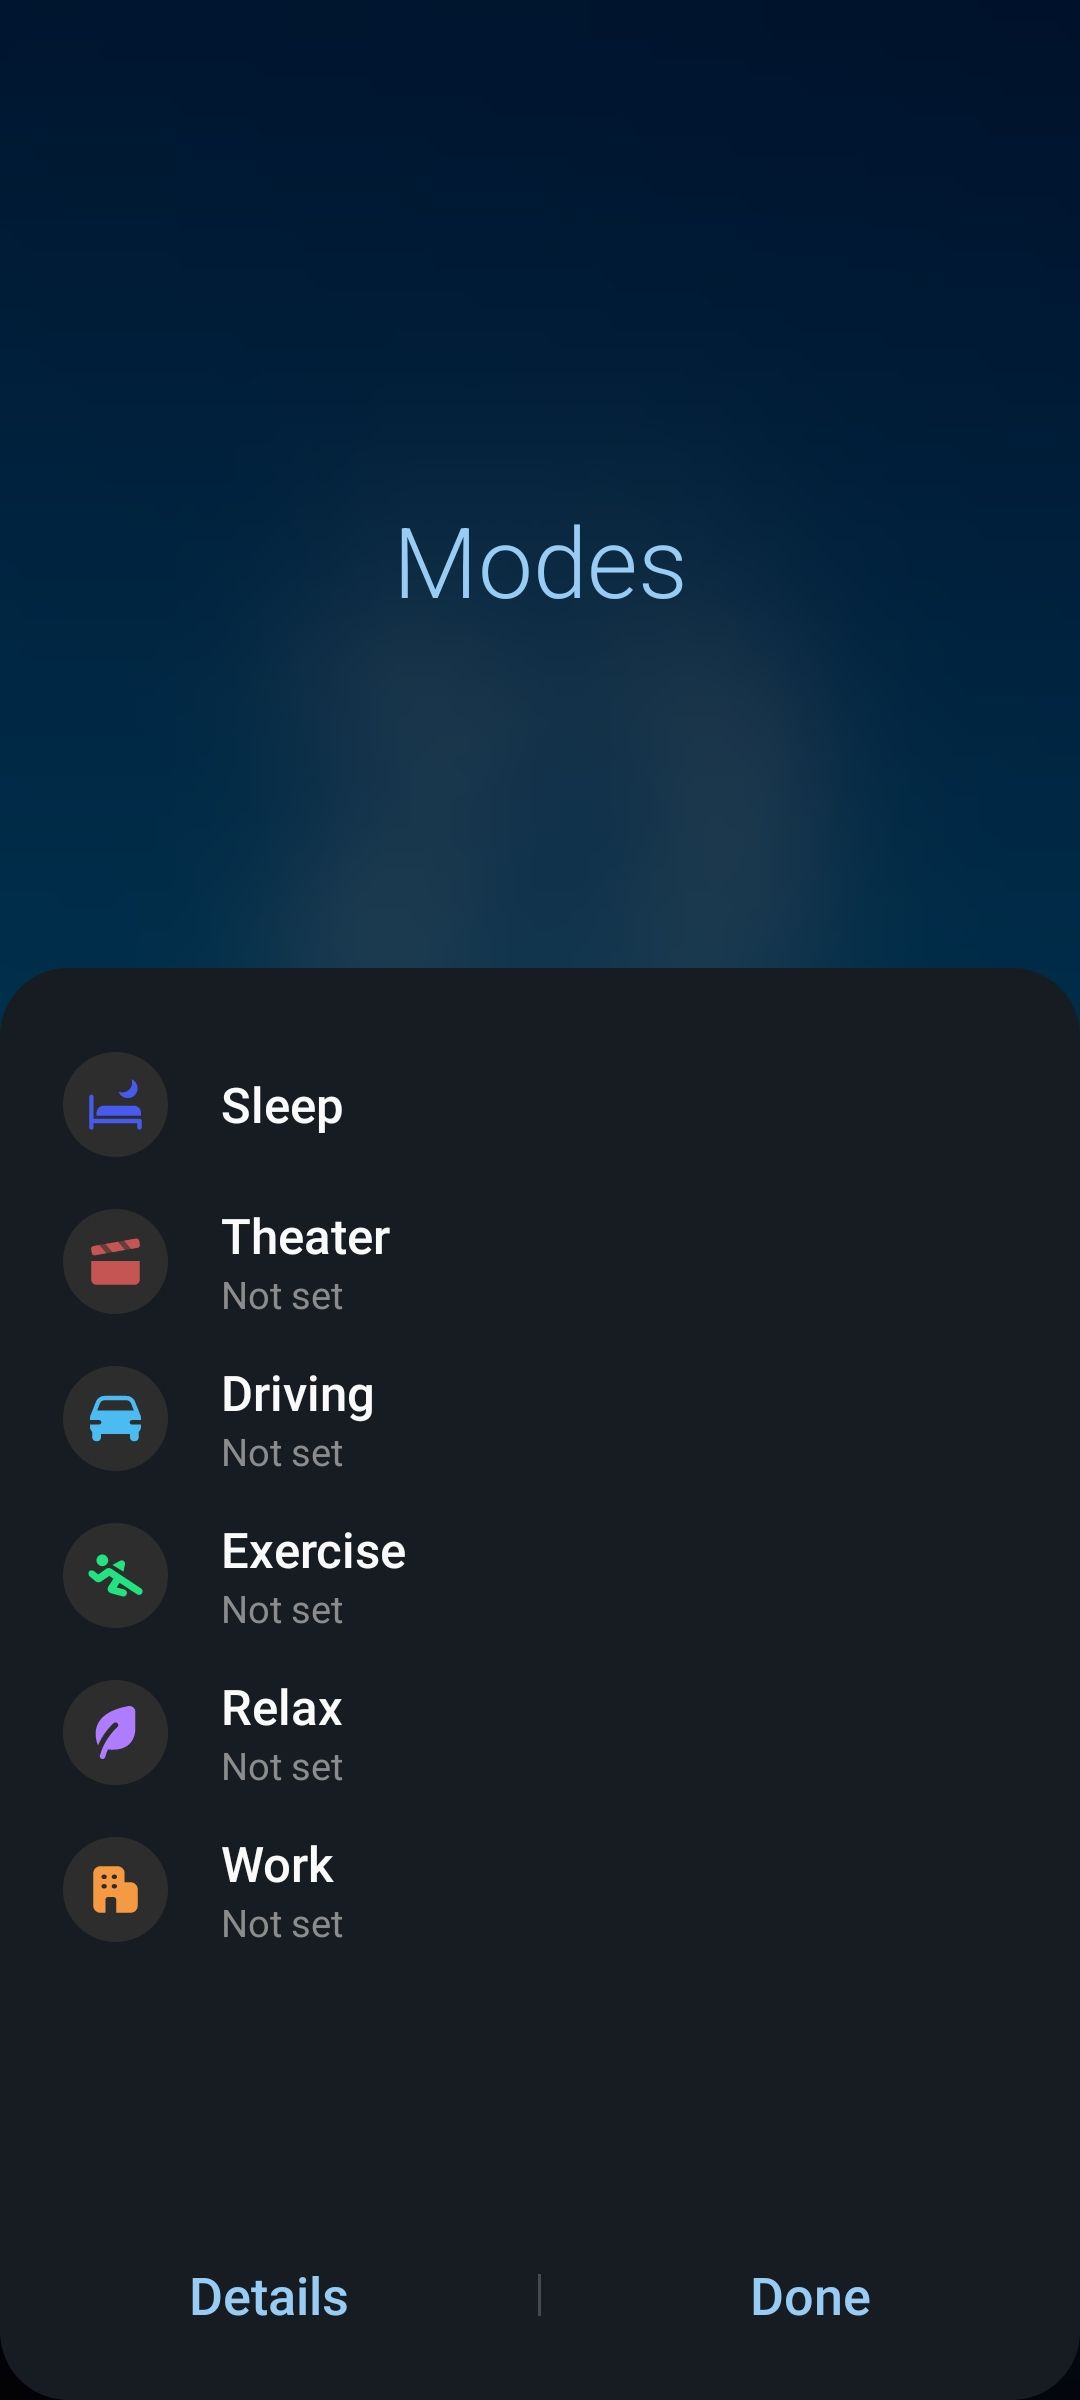 Samsung Modes list in Quick Settings panel